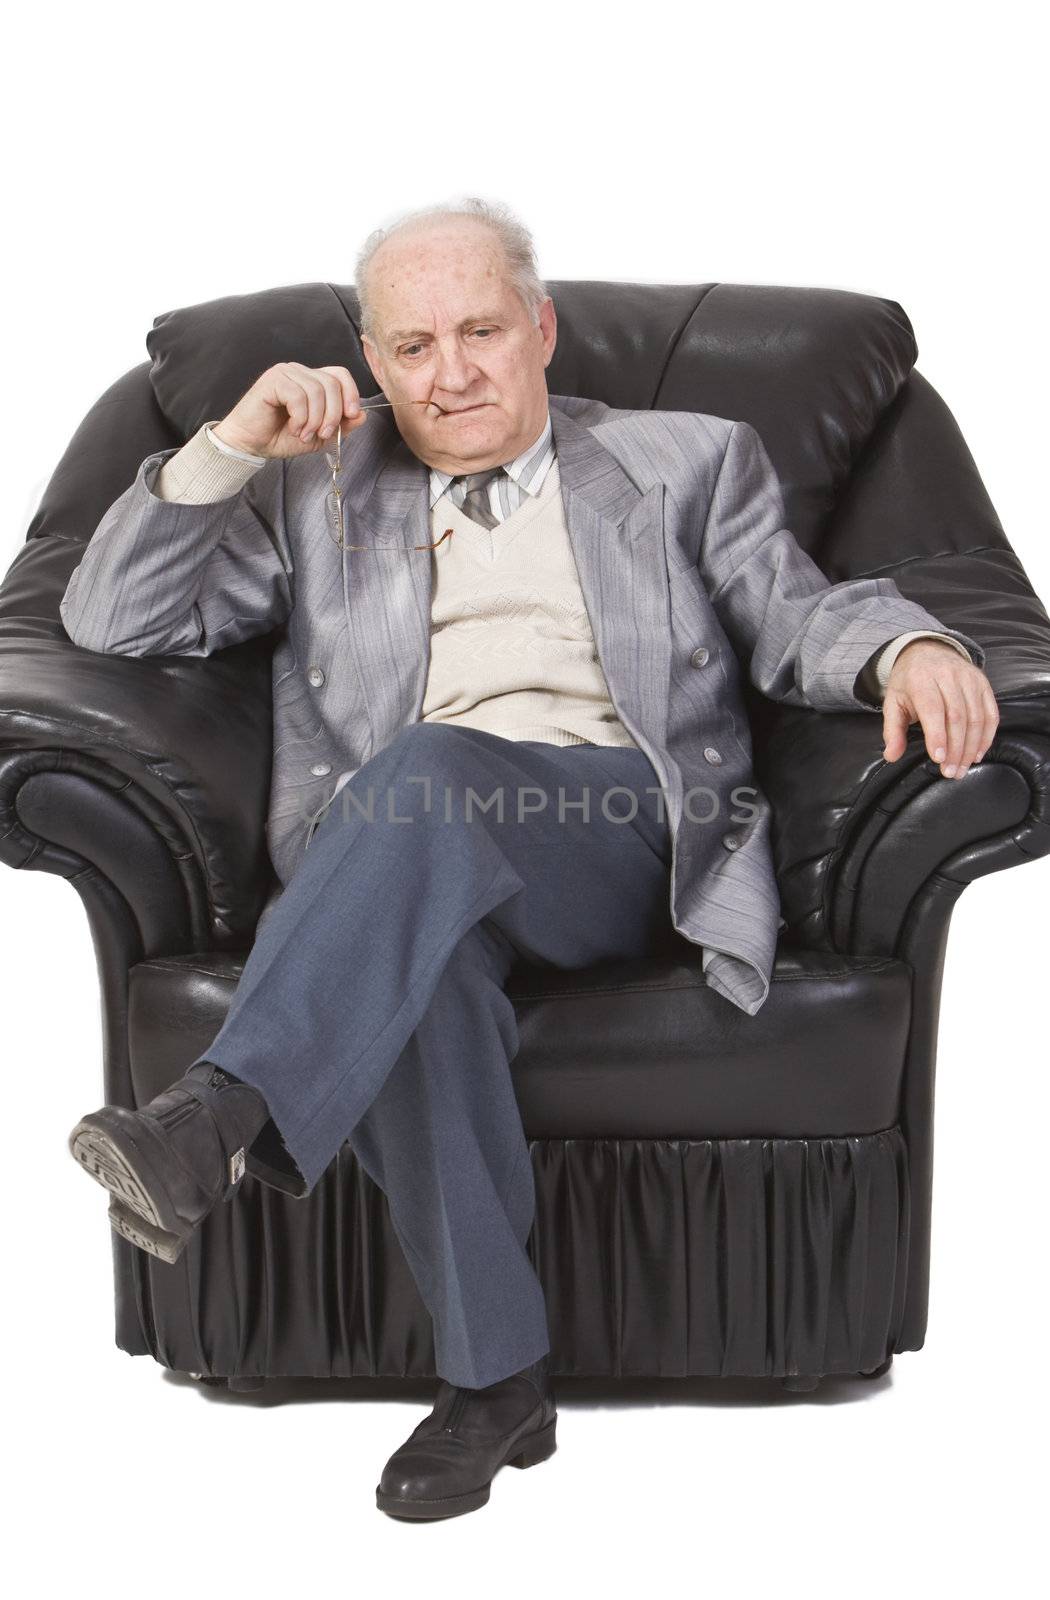 Portrait of a senior man sitting in an armchair and thinking deeply.Shot with Canon 70-200mm f/2.8L IS USM